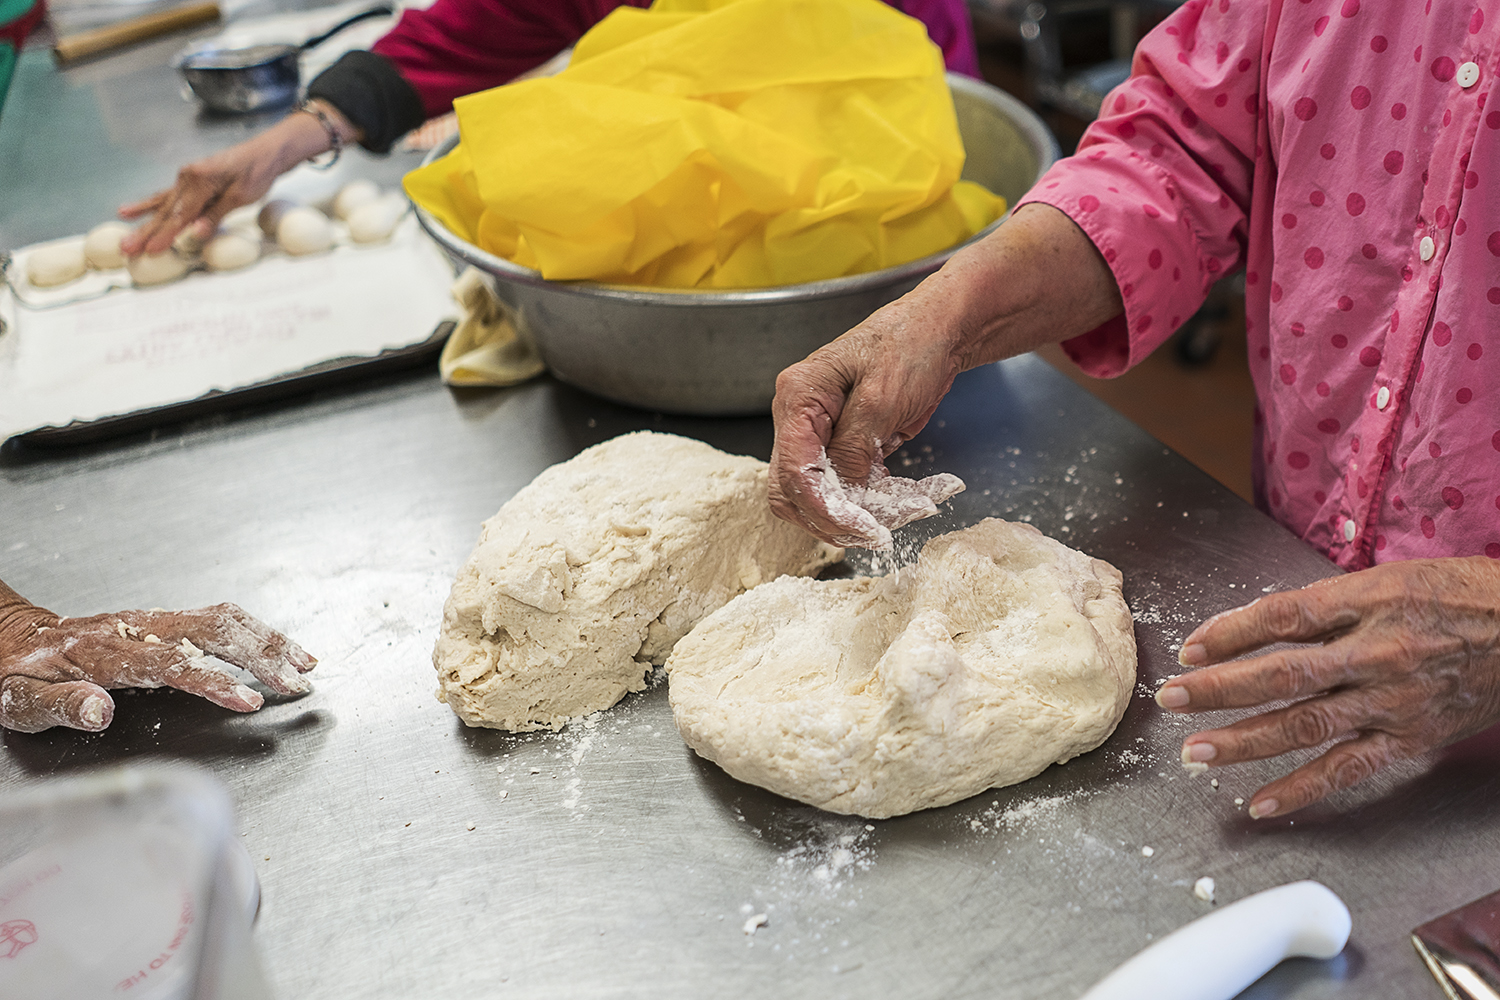 The women of the Tortilla Factory each bring their own unique style of handling the masa. Some sprinkle flour, some dip the masa in flour, and some sprinkle flour on the countertops as they prepare tortillas for Our Lady of Guadalupe.